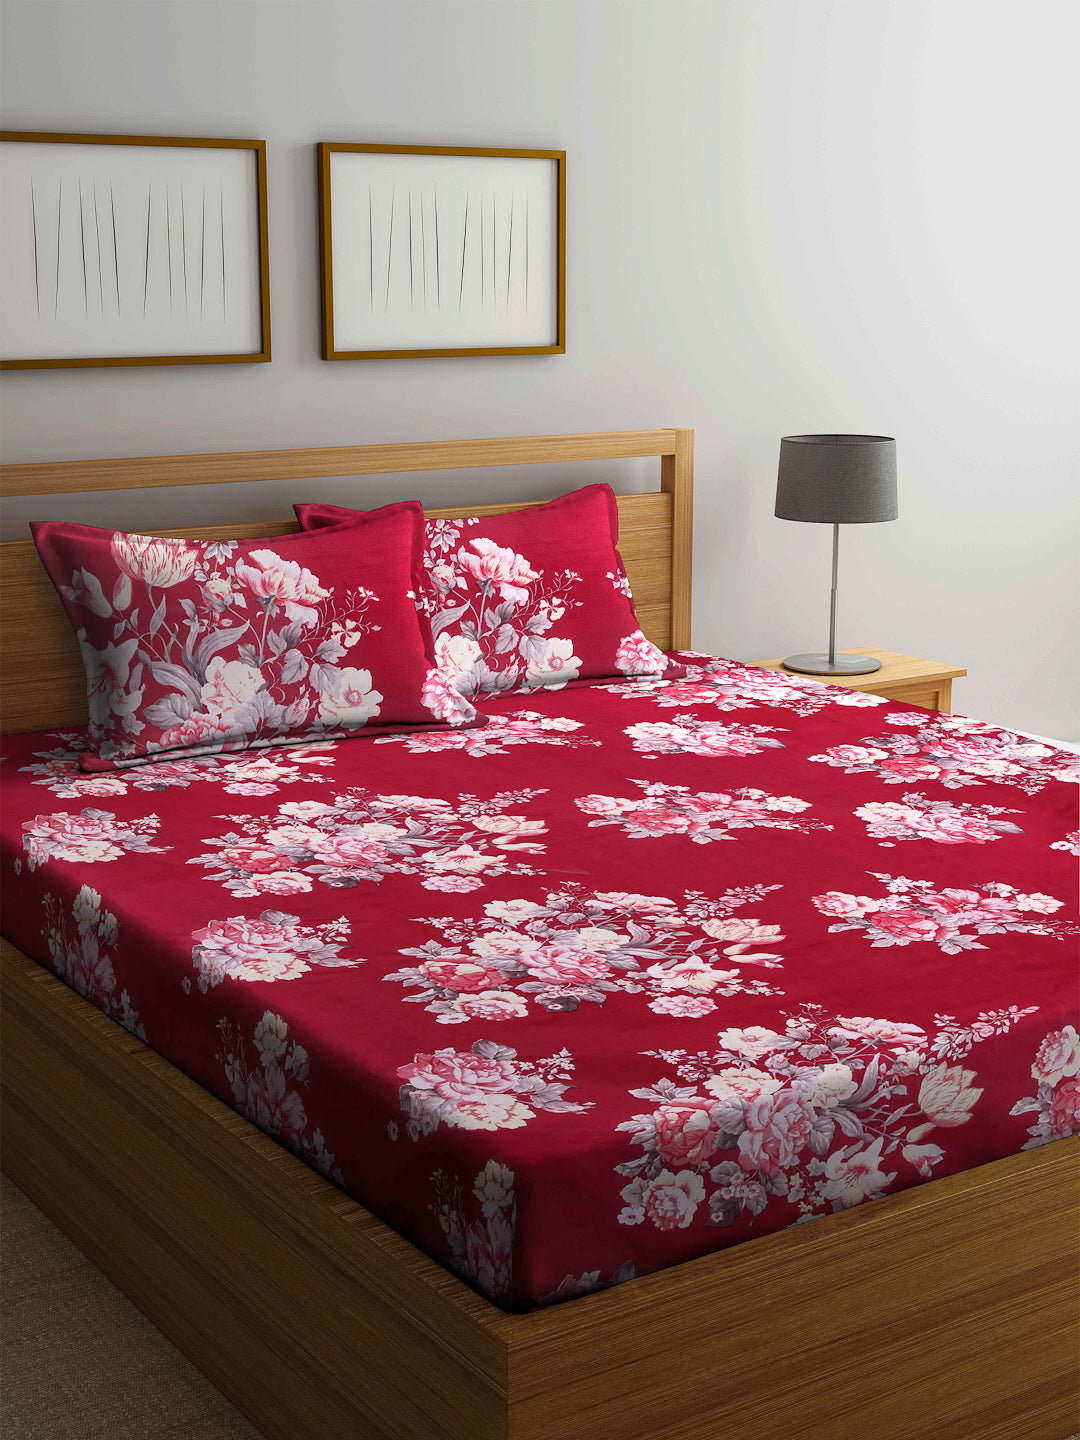 Arrabi Red Floral TC Cotton Blend Double King Size Bedsheet with 2 Pillow Covers (270 x 260 cm)